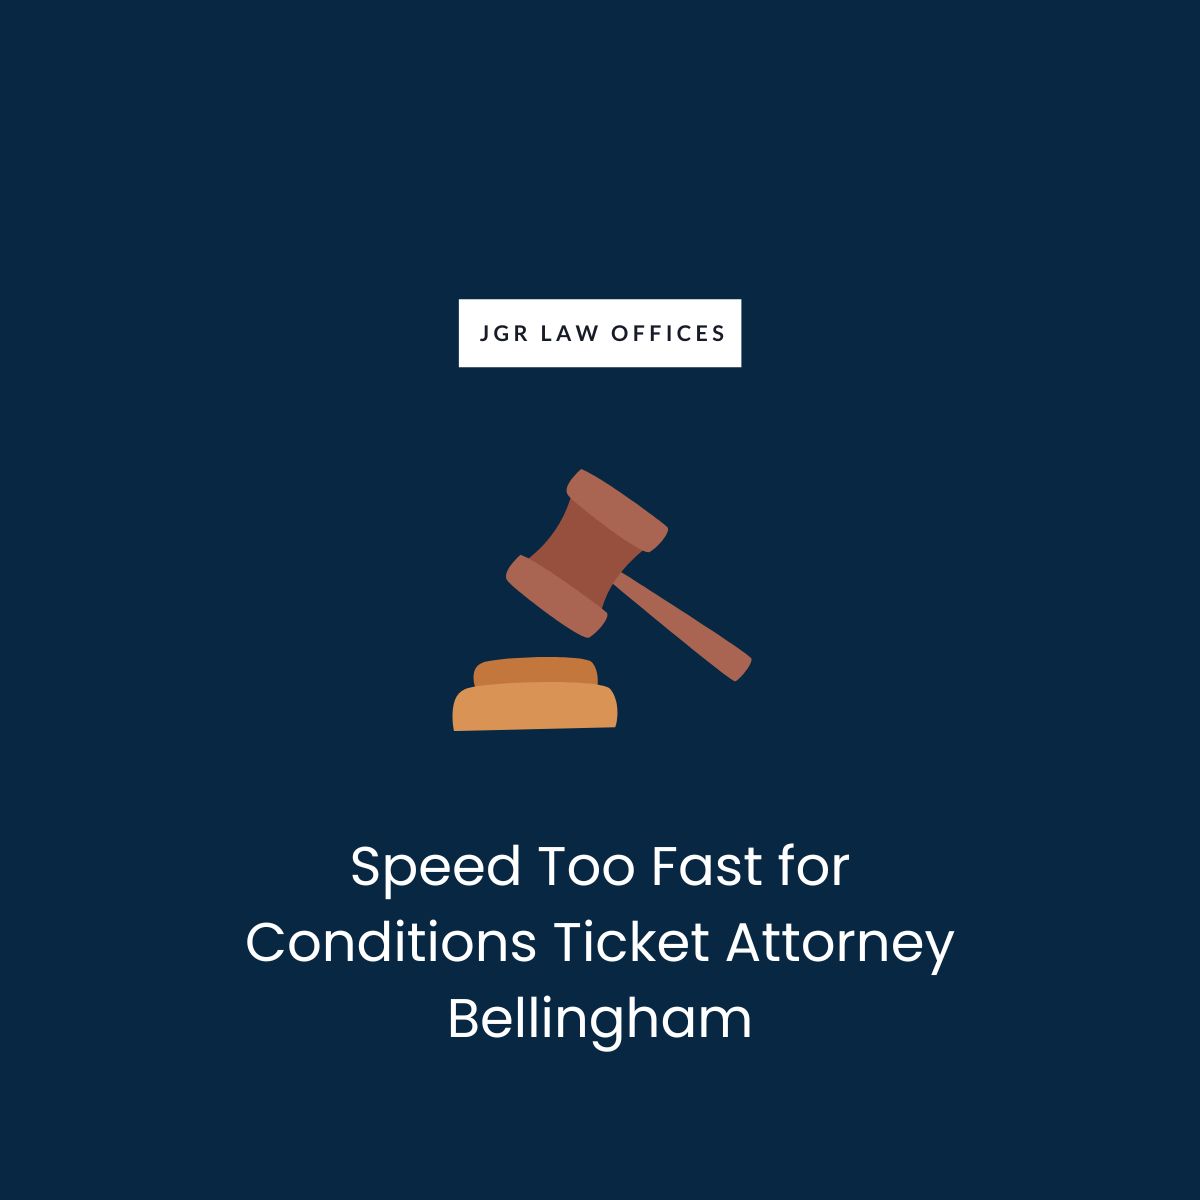 Speed Too Fast for Conditions Ticket Attorney Bellingham